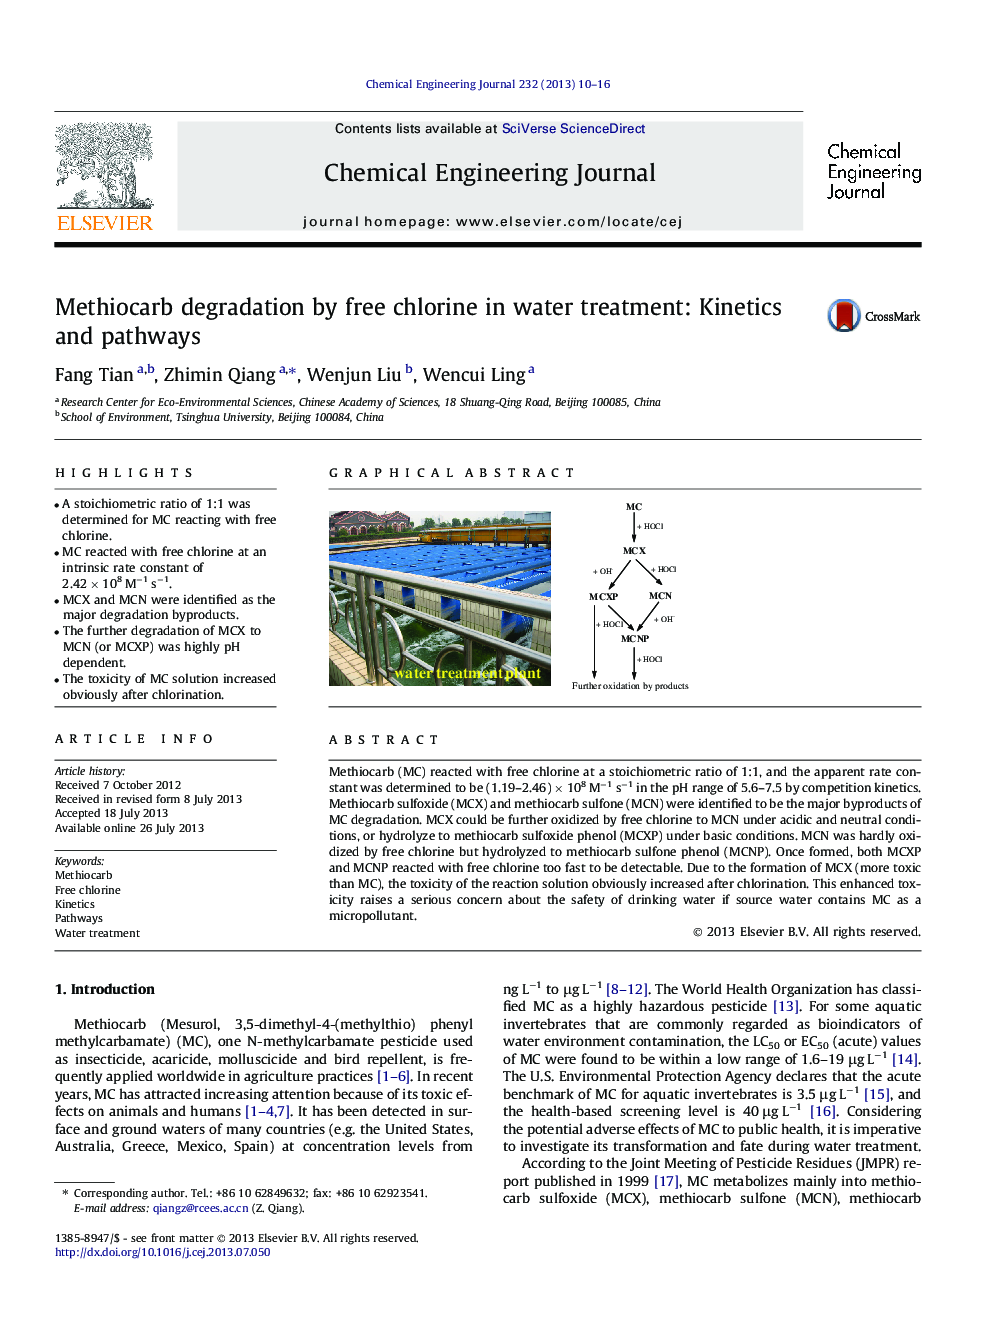 Methiocarb degradation by free chlorine in water treatment: Kinetics and pathways